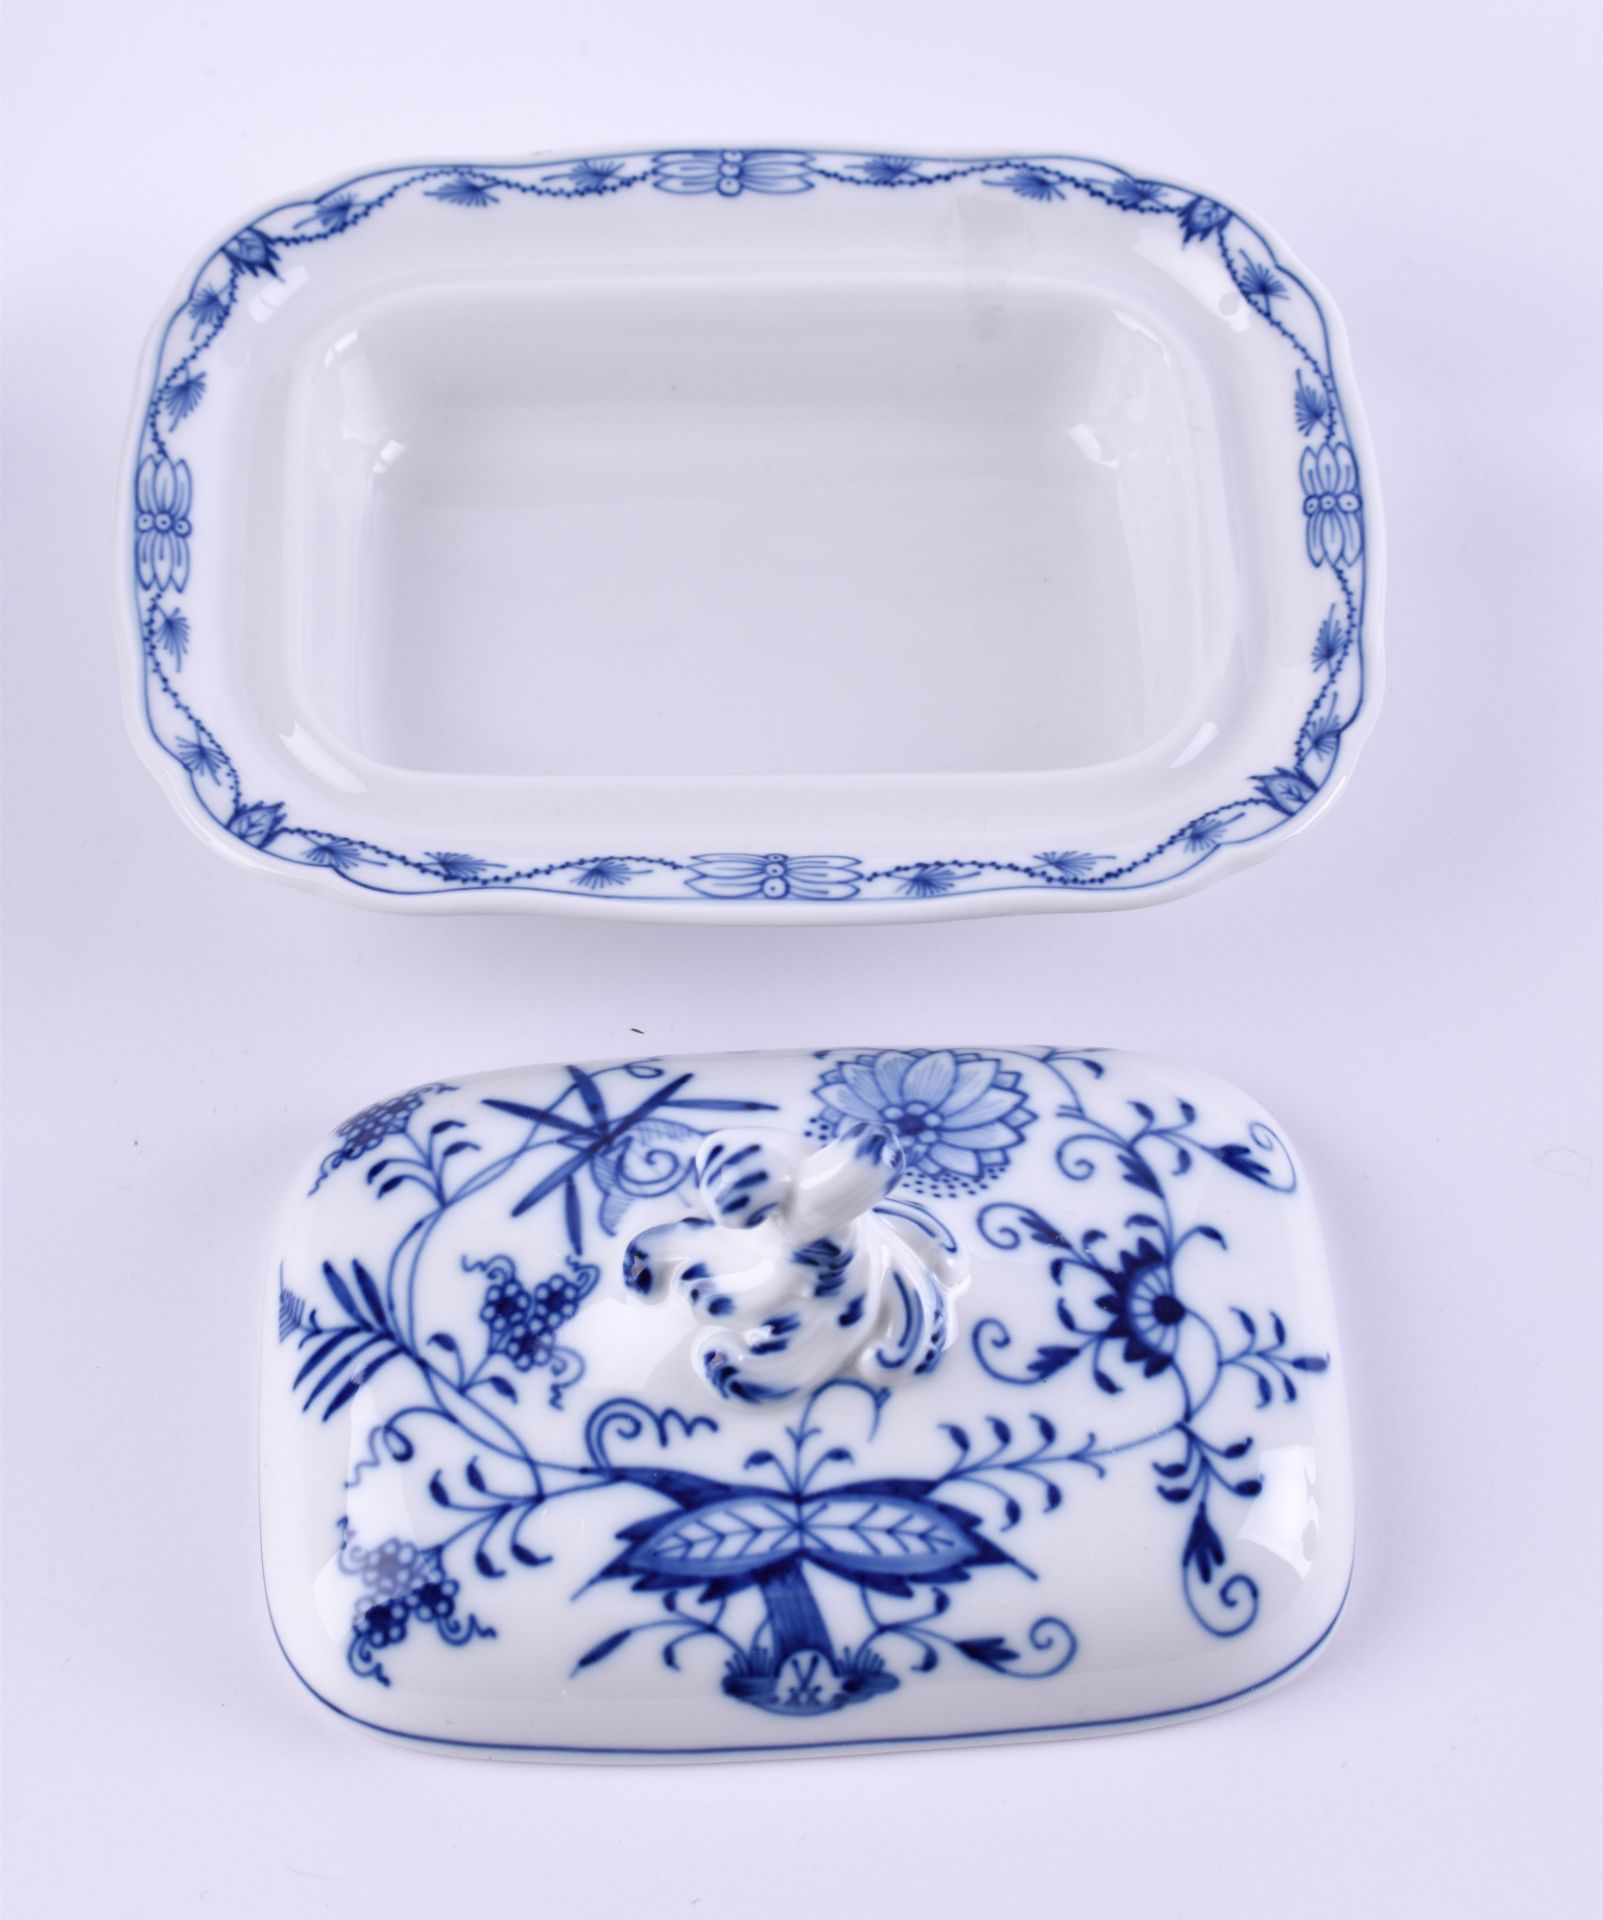 Butter dish Meissen - Image 3 of 4